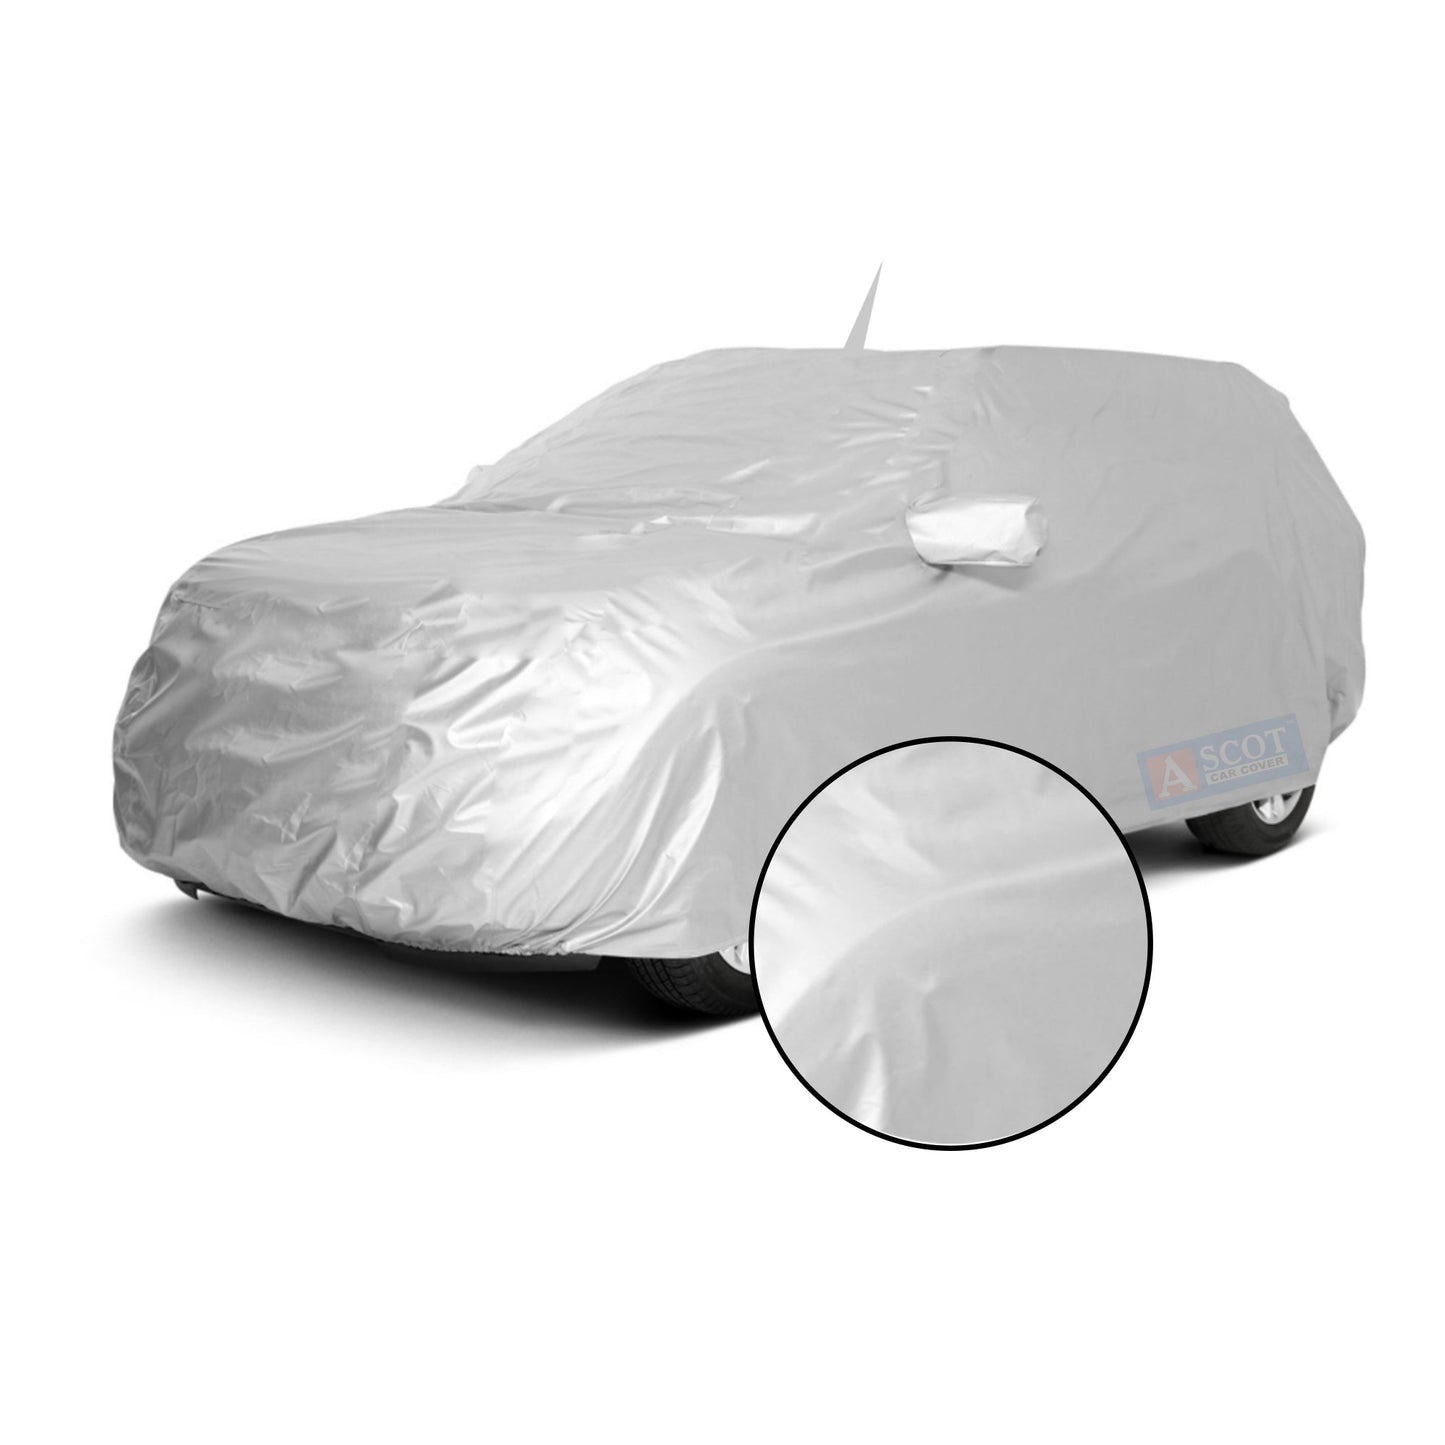 Ascot BMW X5 2019-2023 Model Car Body Cover Dust Proof, Trippel Stitched